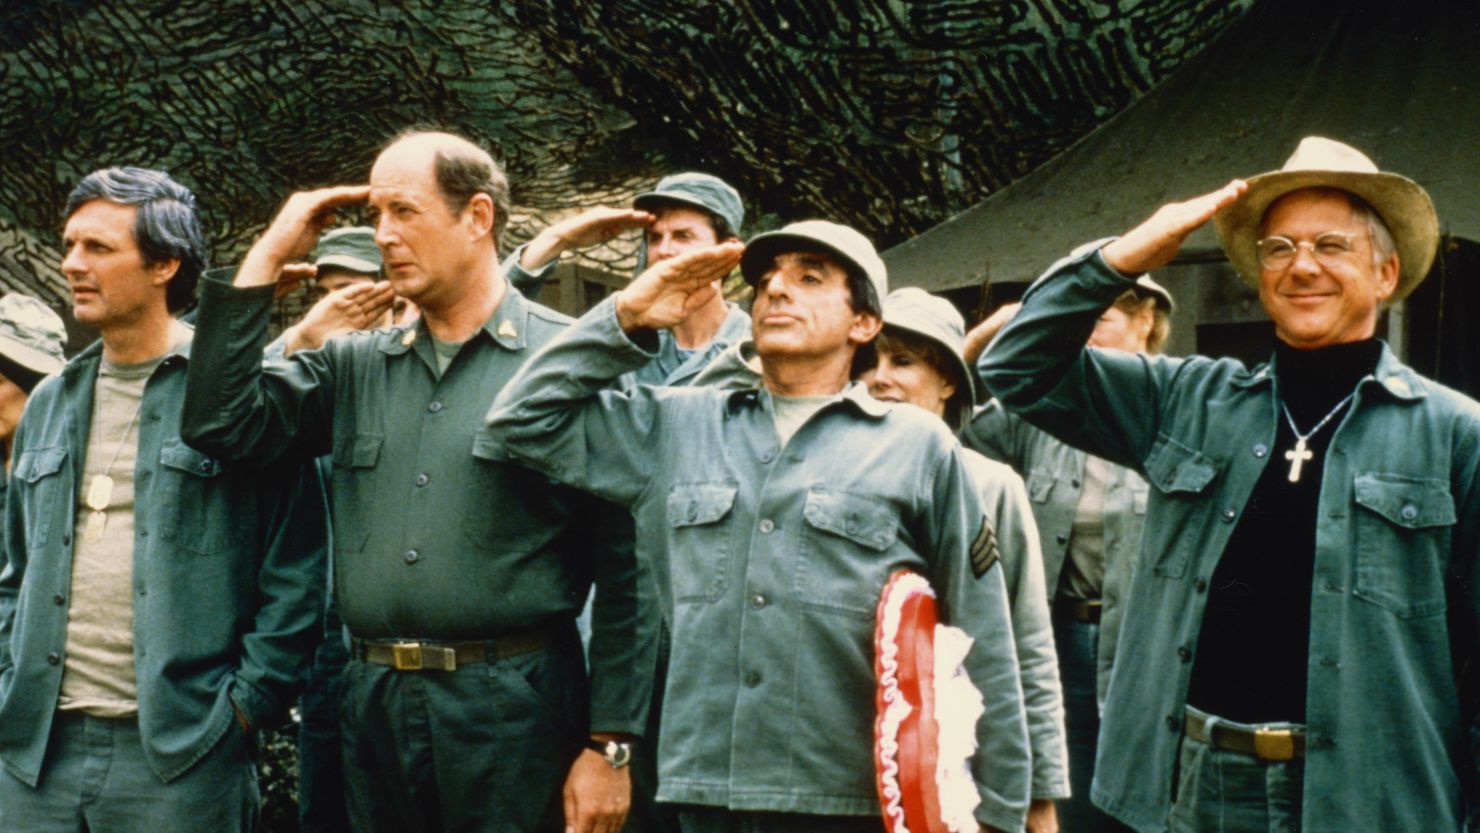 Alan Alda, David Ogden Stiers, Jamie Farr and William Christopher in a scene from "M*A*S*H," which ended its run on February 28, 1983.